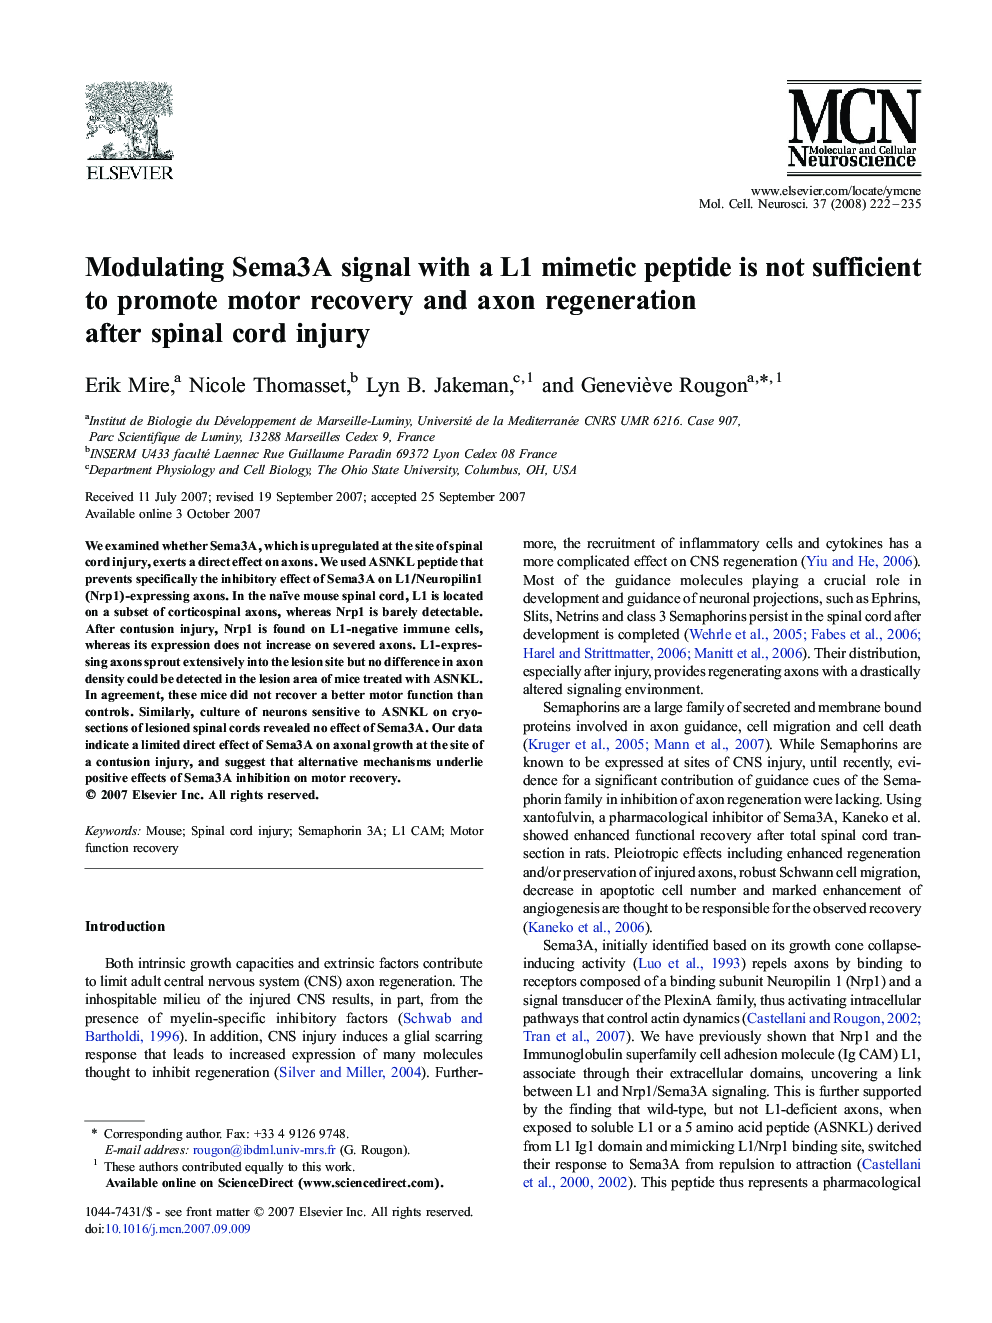 Modulating Sema3A signal with a L1 mimetic peptide is not sufficient to promote motor recovery and axon regeneration after spinal cord injury